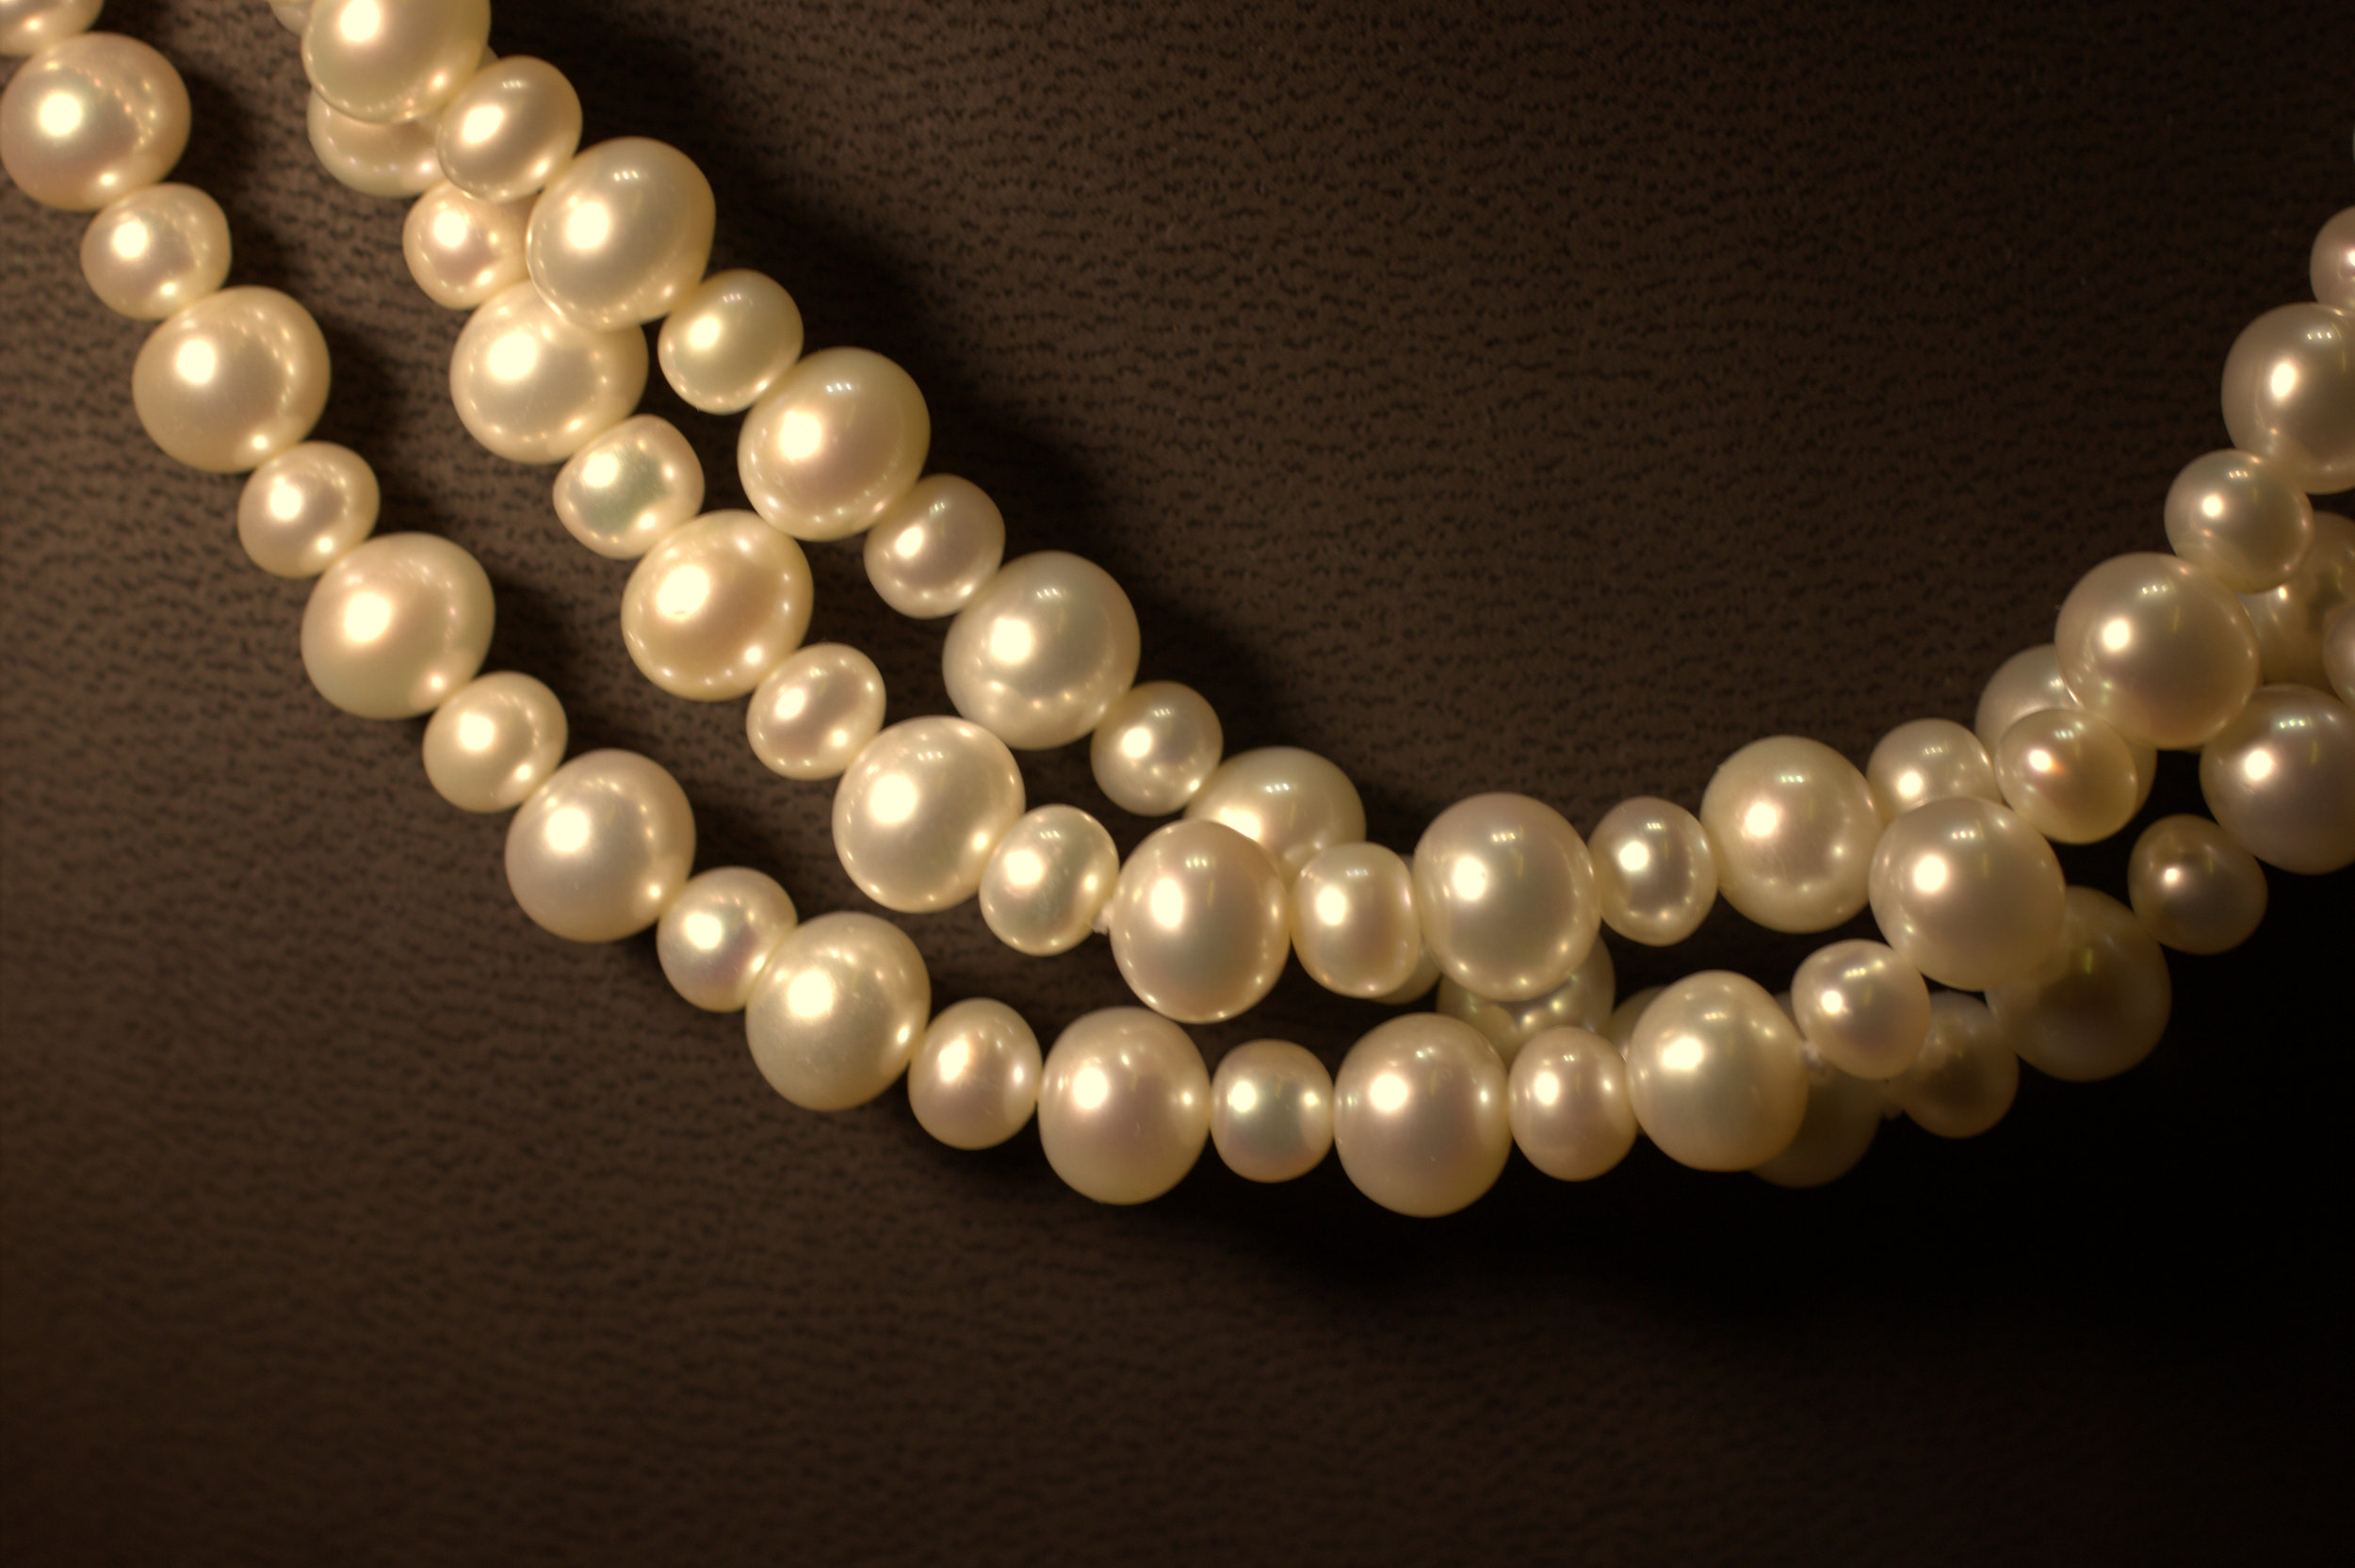 3 row alternating sizes pearl necklace with sterling silver clasp great luster beatiful classic look for a great price lots of bang for your buck available at Marlen Jewelers in Rocky River minutes from Cleveland.jpg